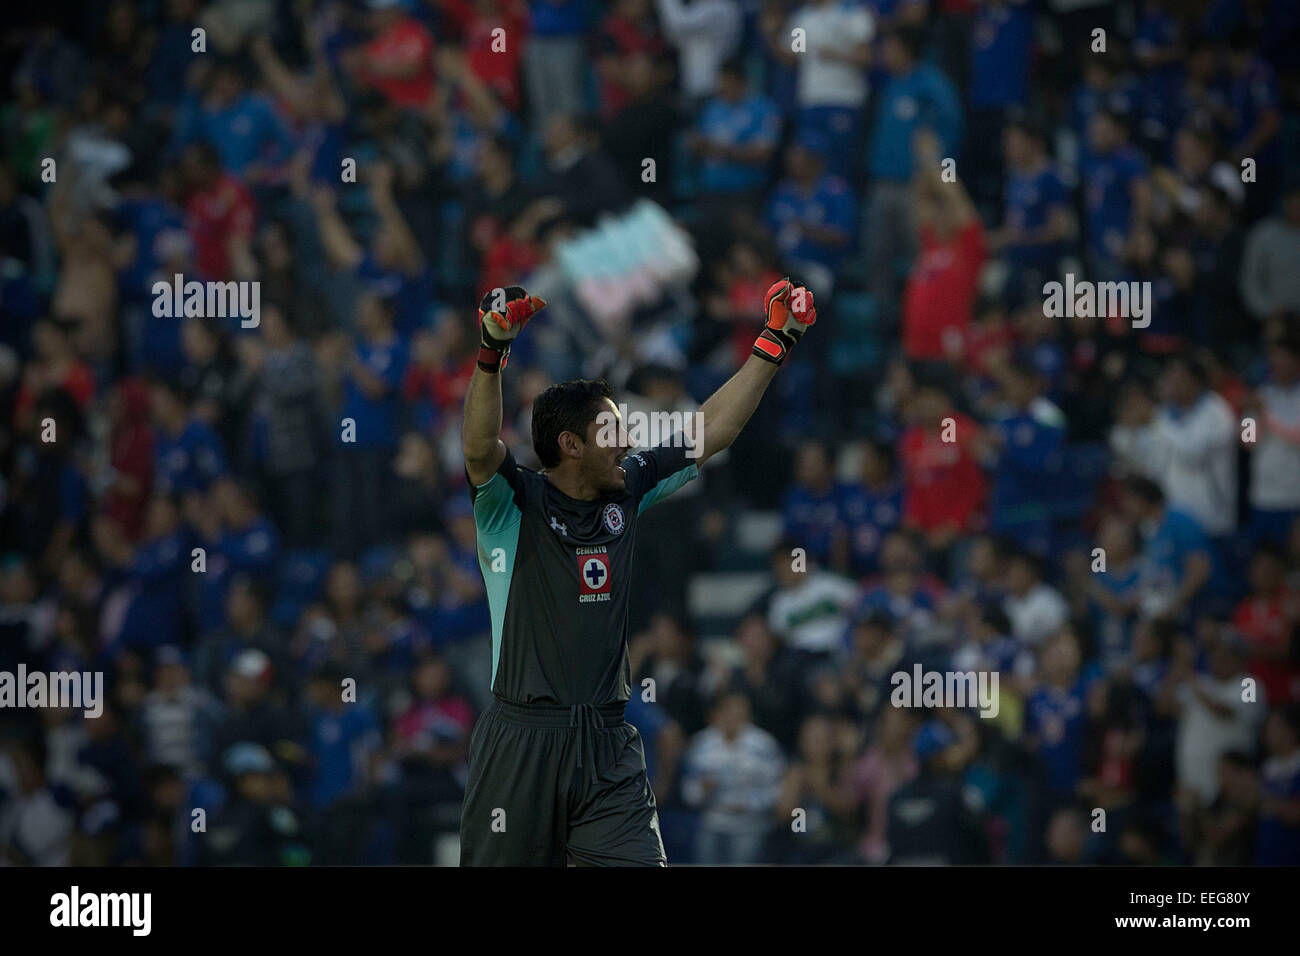 Mexico City, Mexico. 17th Jan, 2015. Cruz Azul's goalkeeper Jesus Corona celebrates during the match corresponding to the Day 2 of the Closing Tournament 2015 of the MX League against Santos, held in the Azul Stadium, in Mexico City, capital of Mexico, on Jan. 17, 2015. Credit:  Alejandro Ayala/Xinhua/Alamy Live News Stock Photo